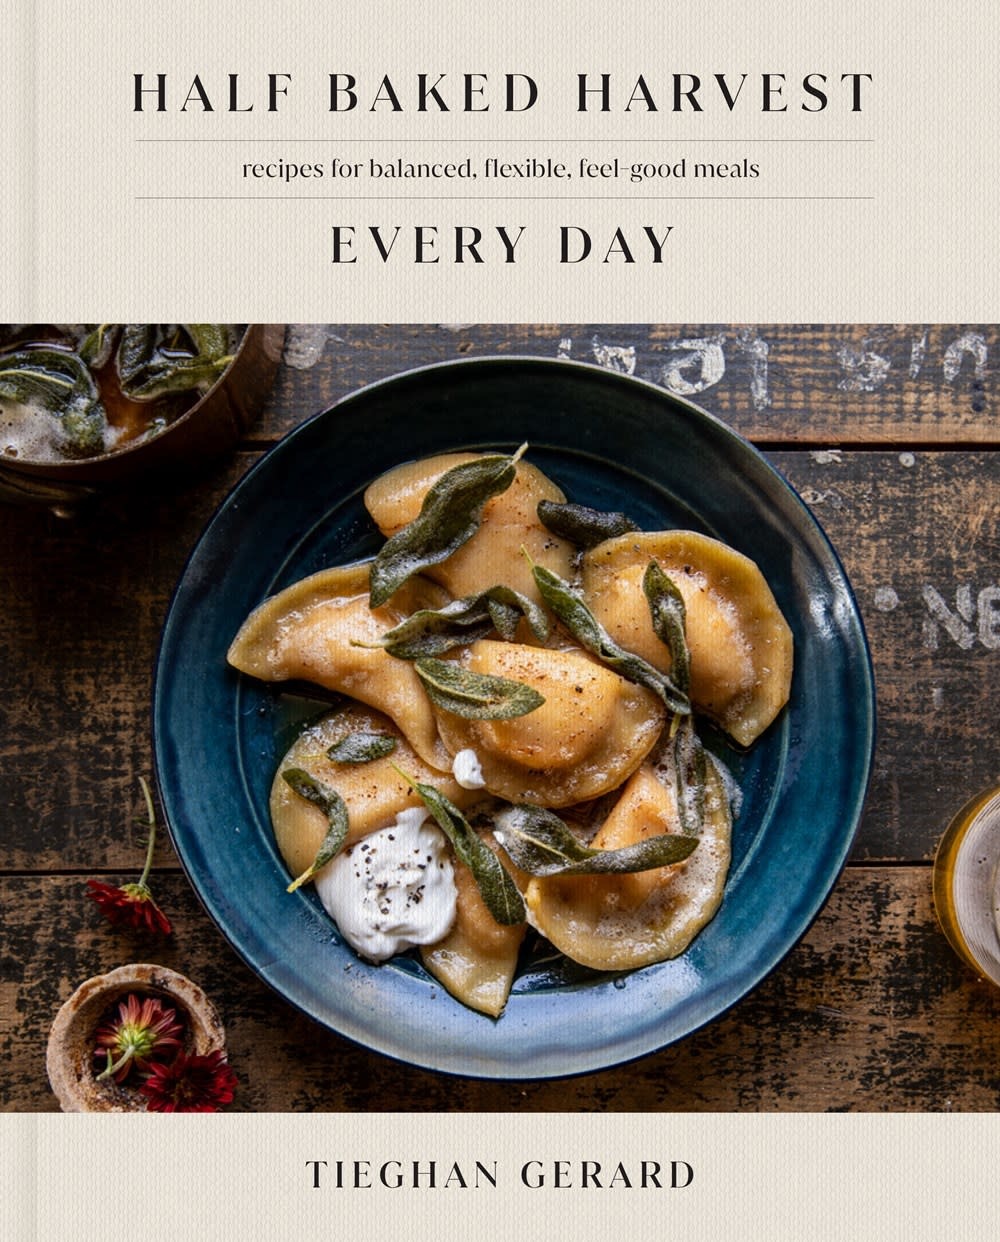 Clarkson Potter Half Baked Harvest Every Day: Recipes for Balanced, Flexible, Feel-Good Meals